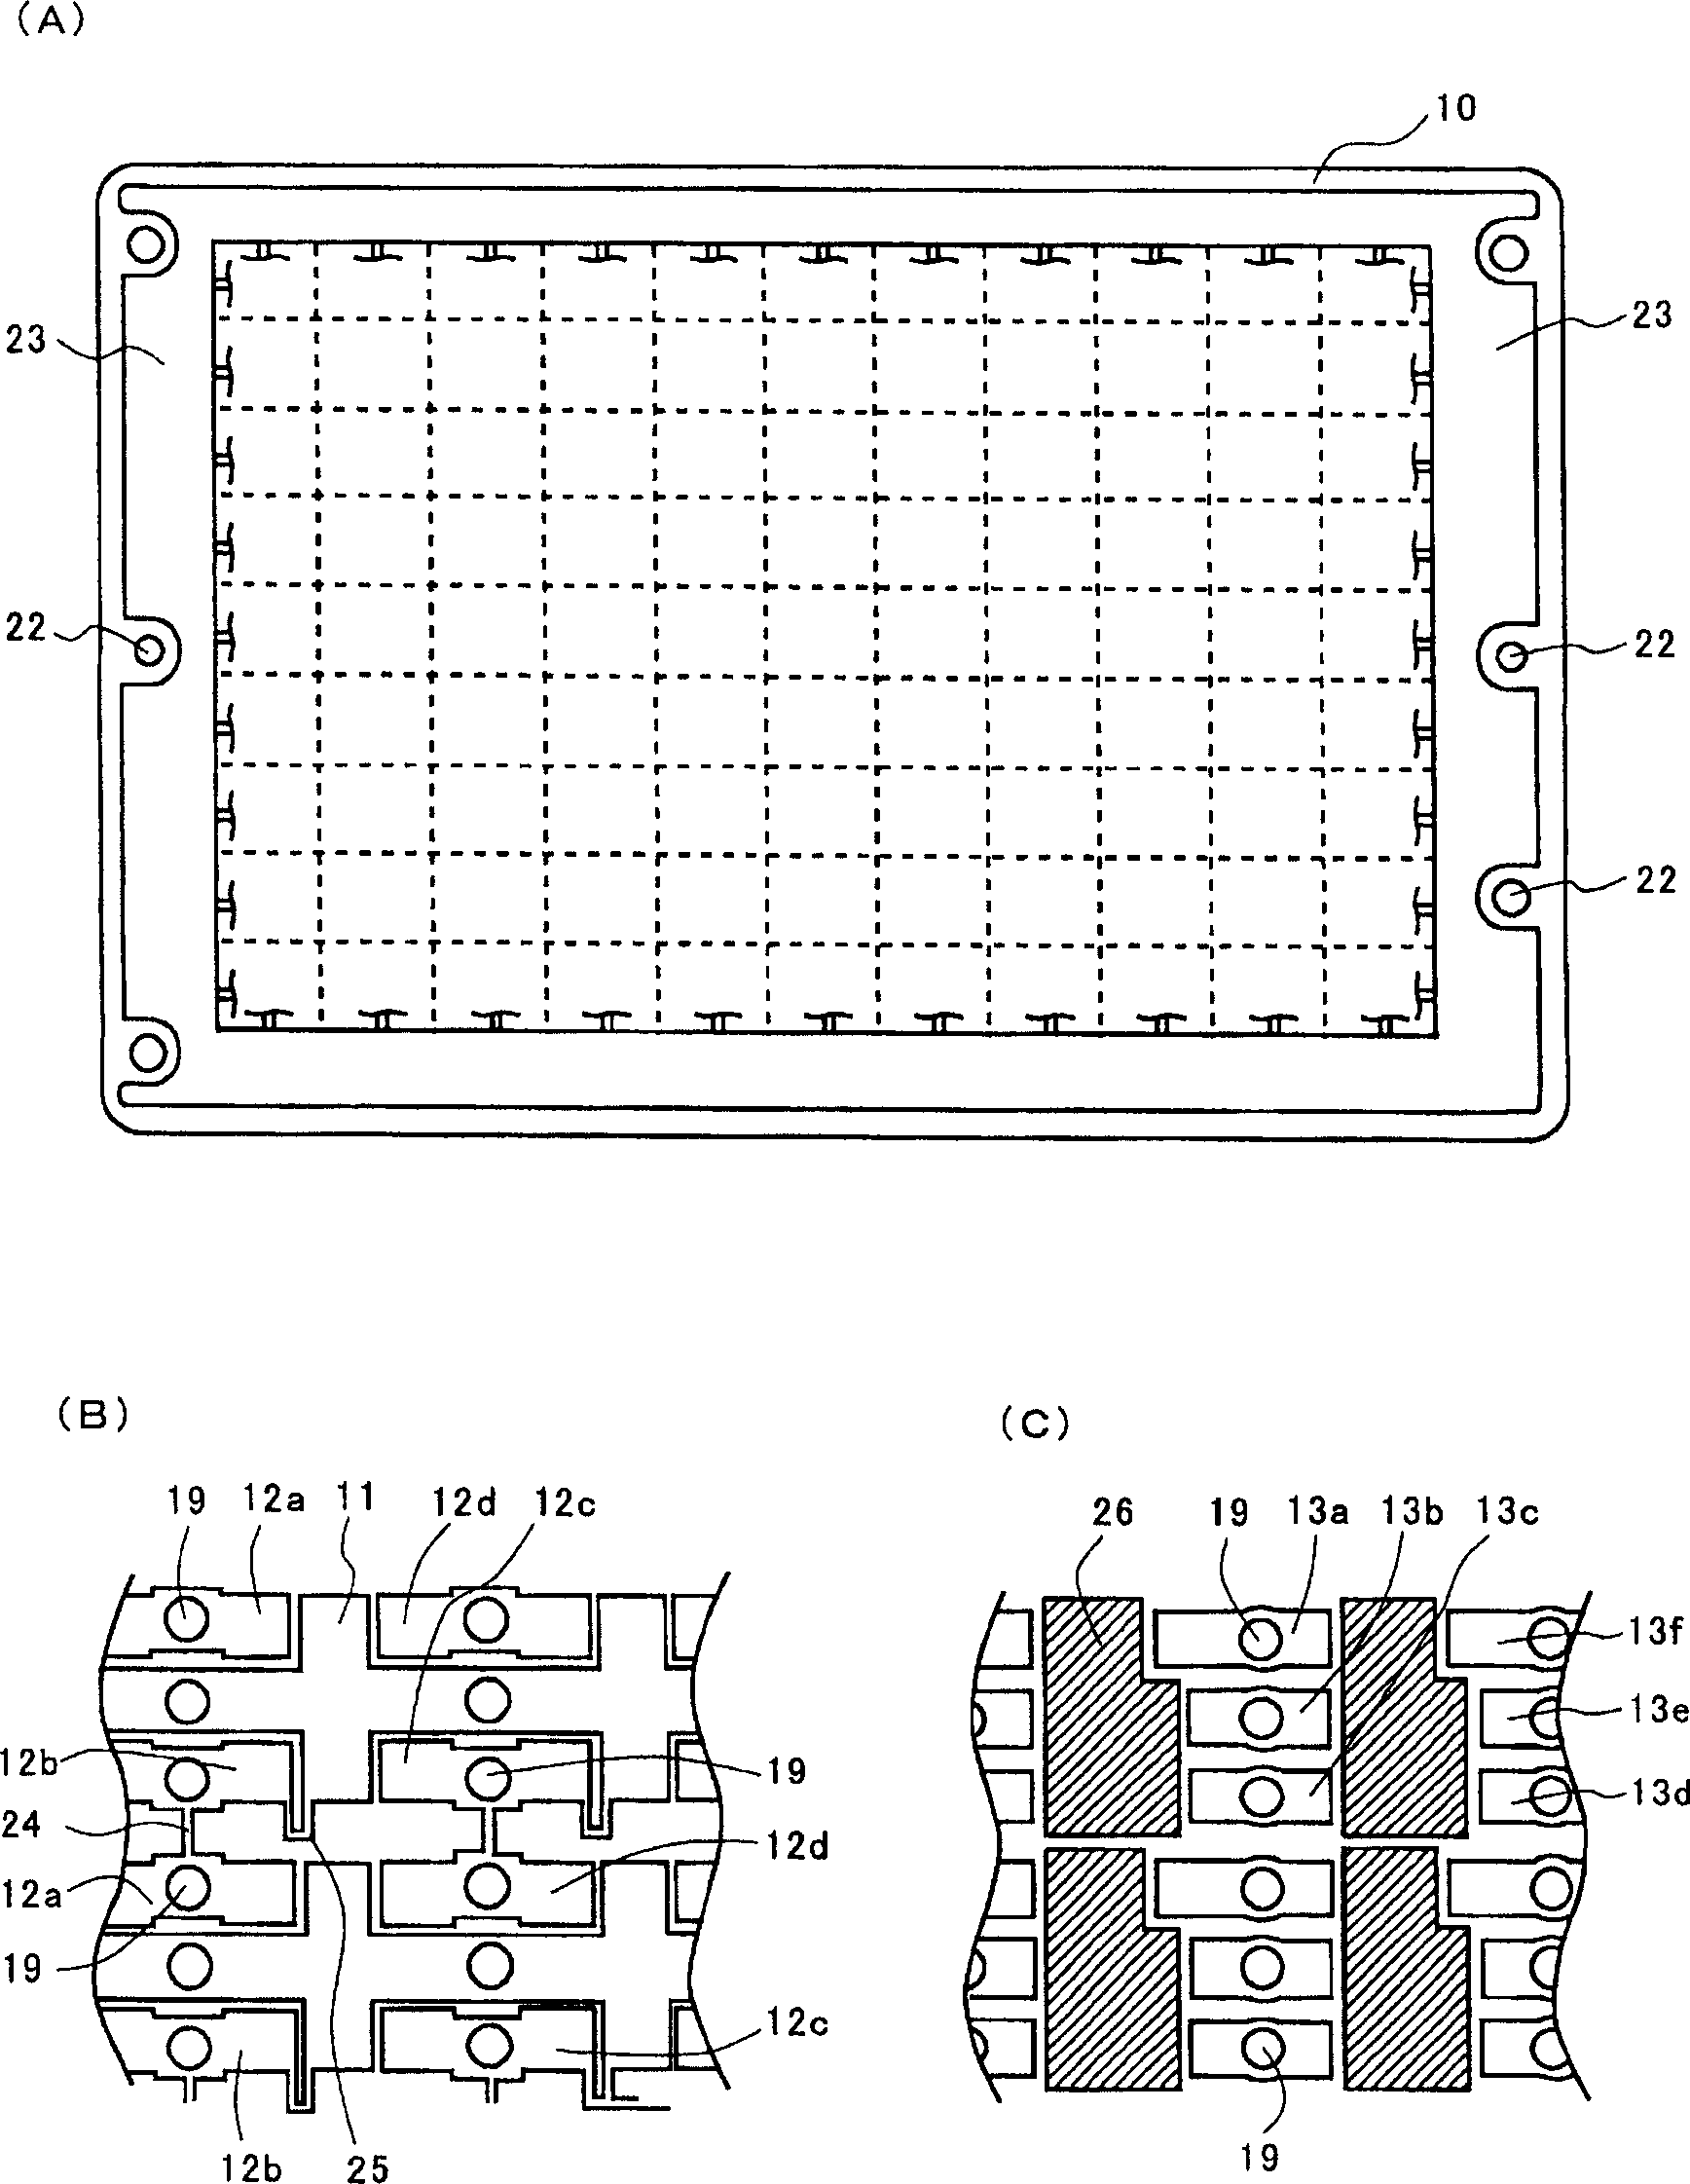 Method of manufacturing mounting board with reflector